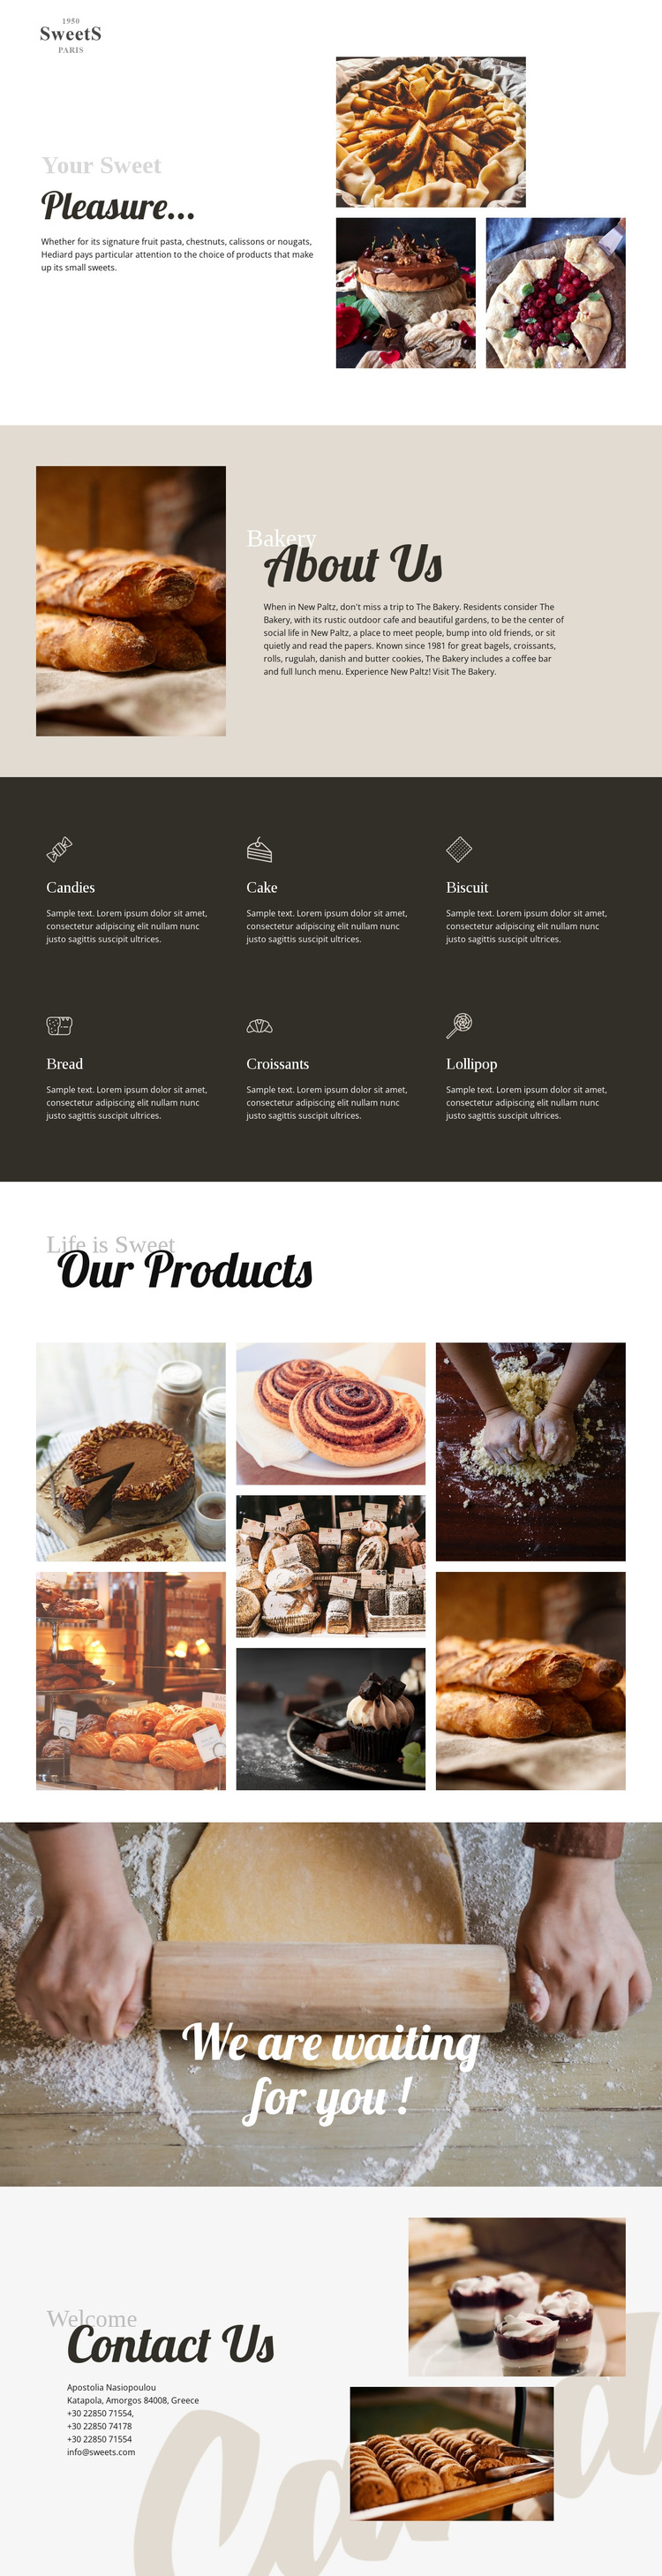 Cakes and baking food Joomla Page Builder